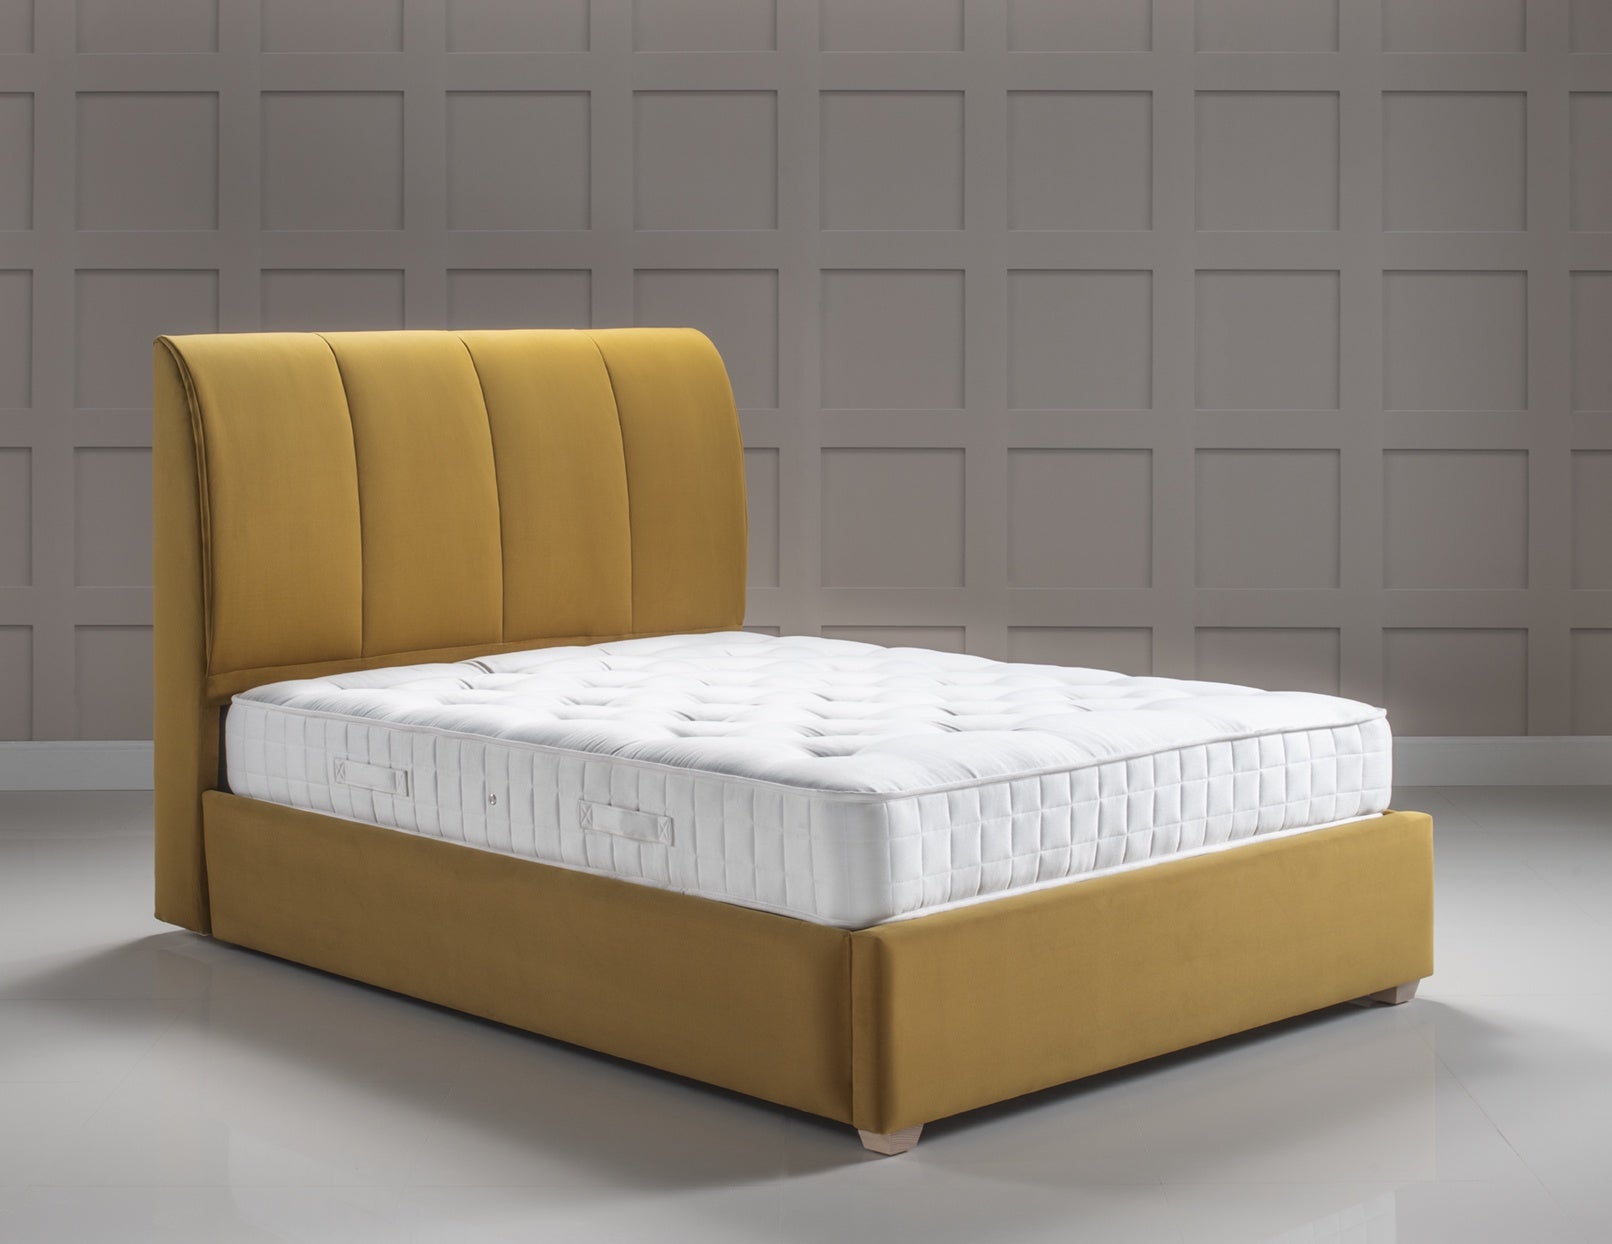 The Charnwood Upholstered Bed